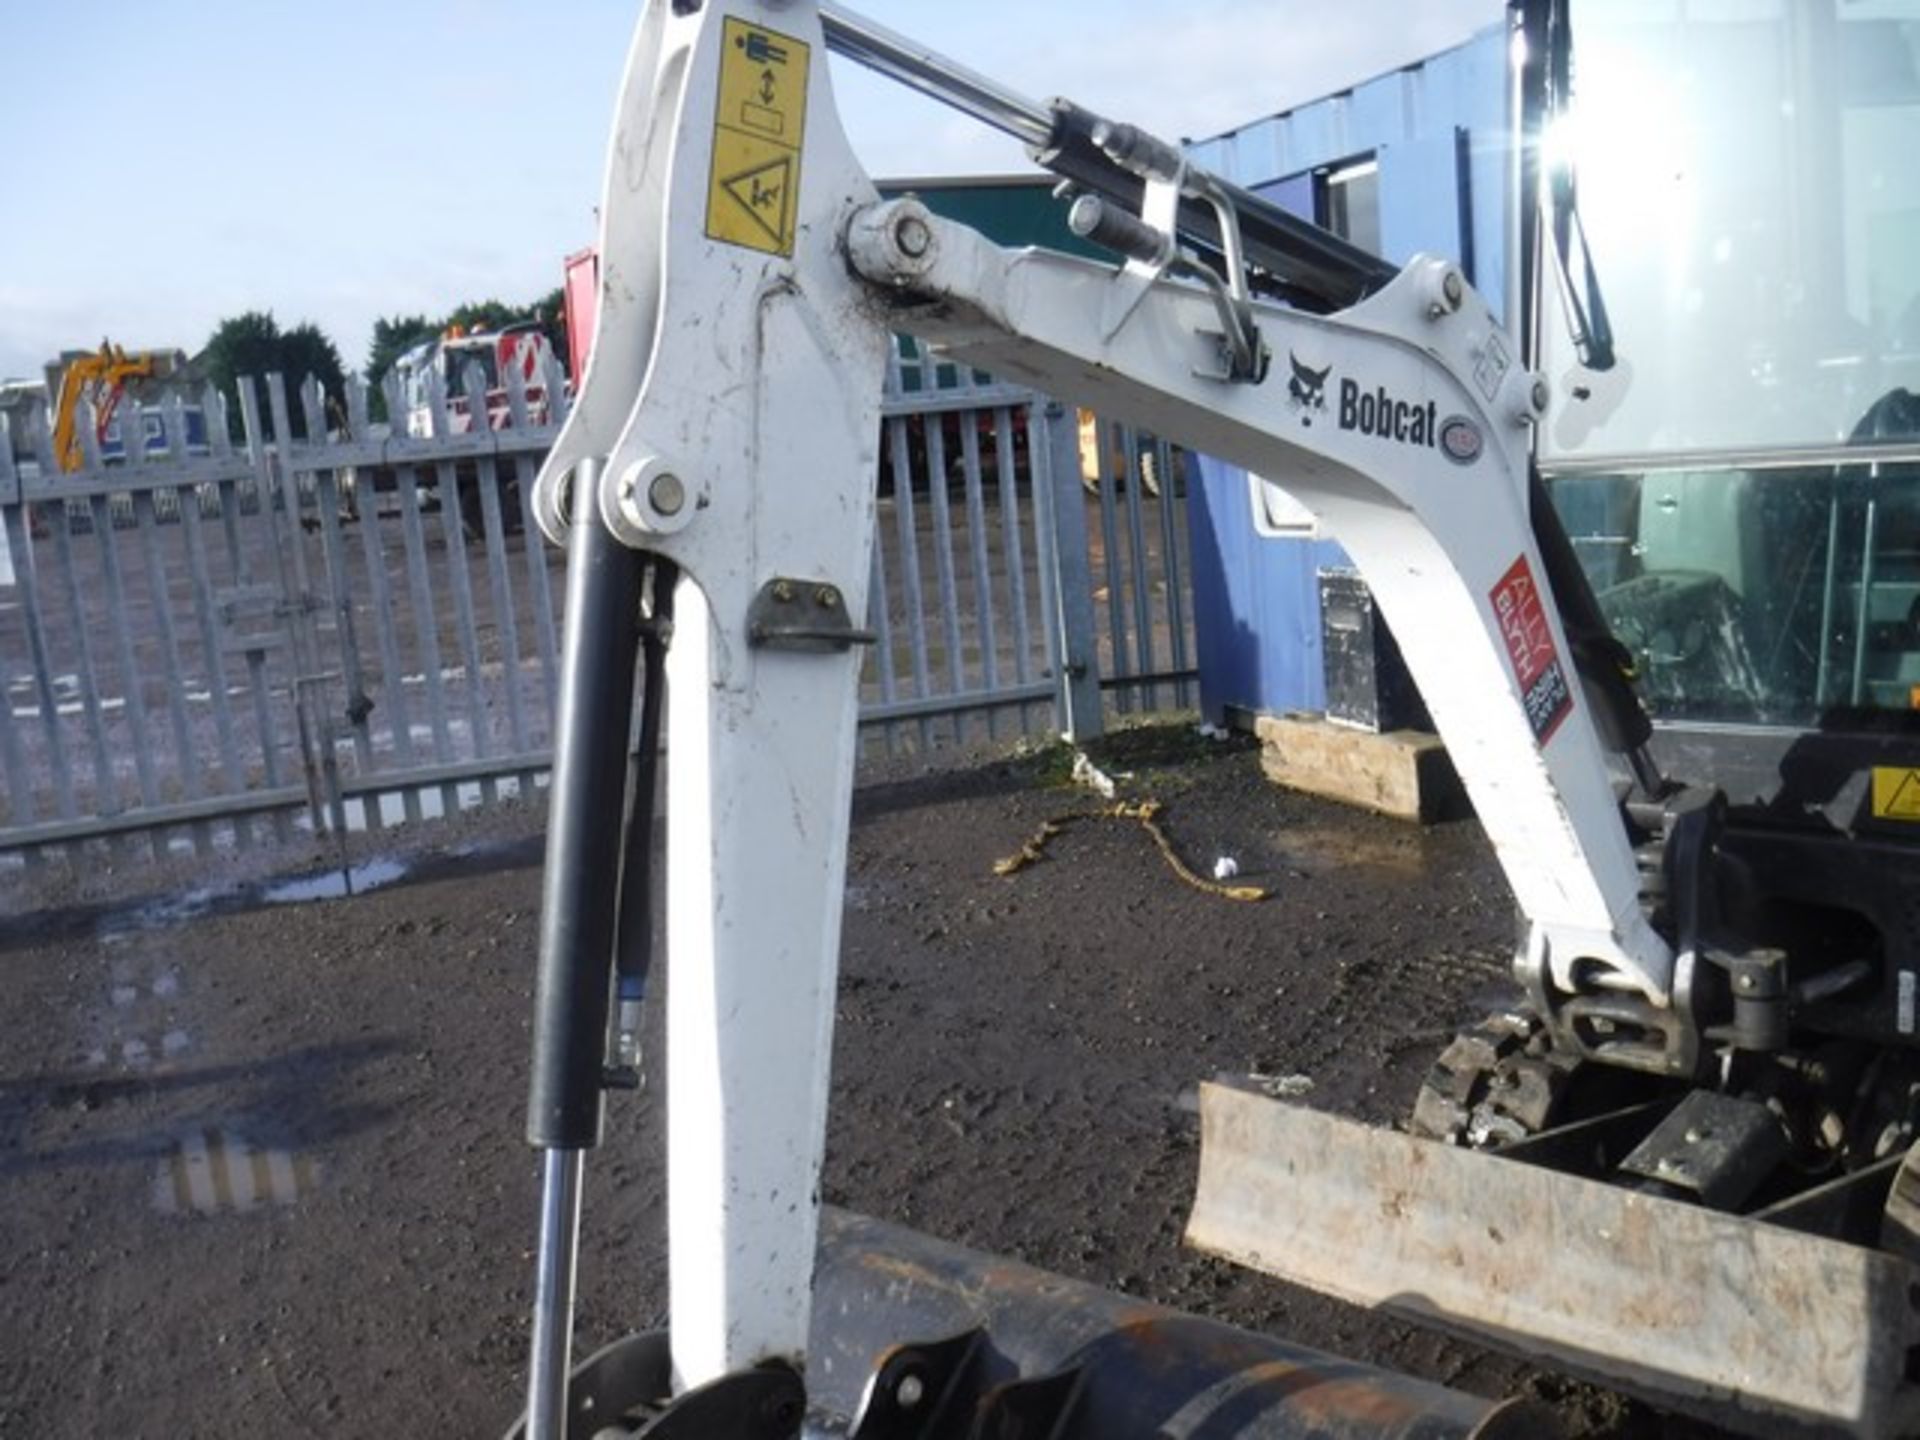 BOB CAT E17 - 2018 COMPACT EXCAVATOR WITH CAB AND BUCKET 166 HRS (NOT VERIFIED) SN - B27H12779 - Image 4 of 12